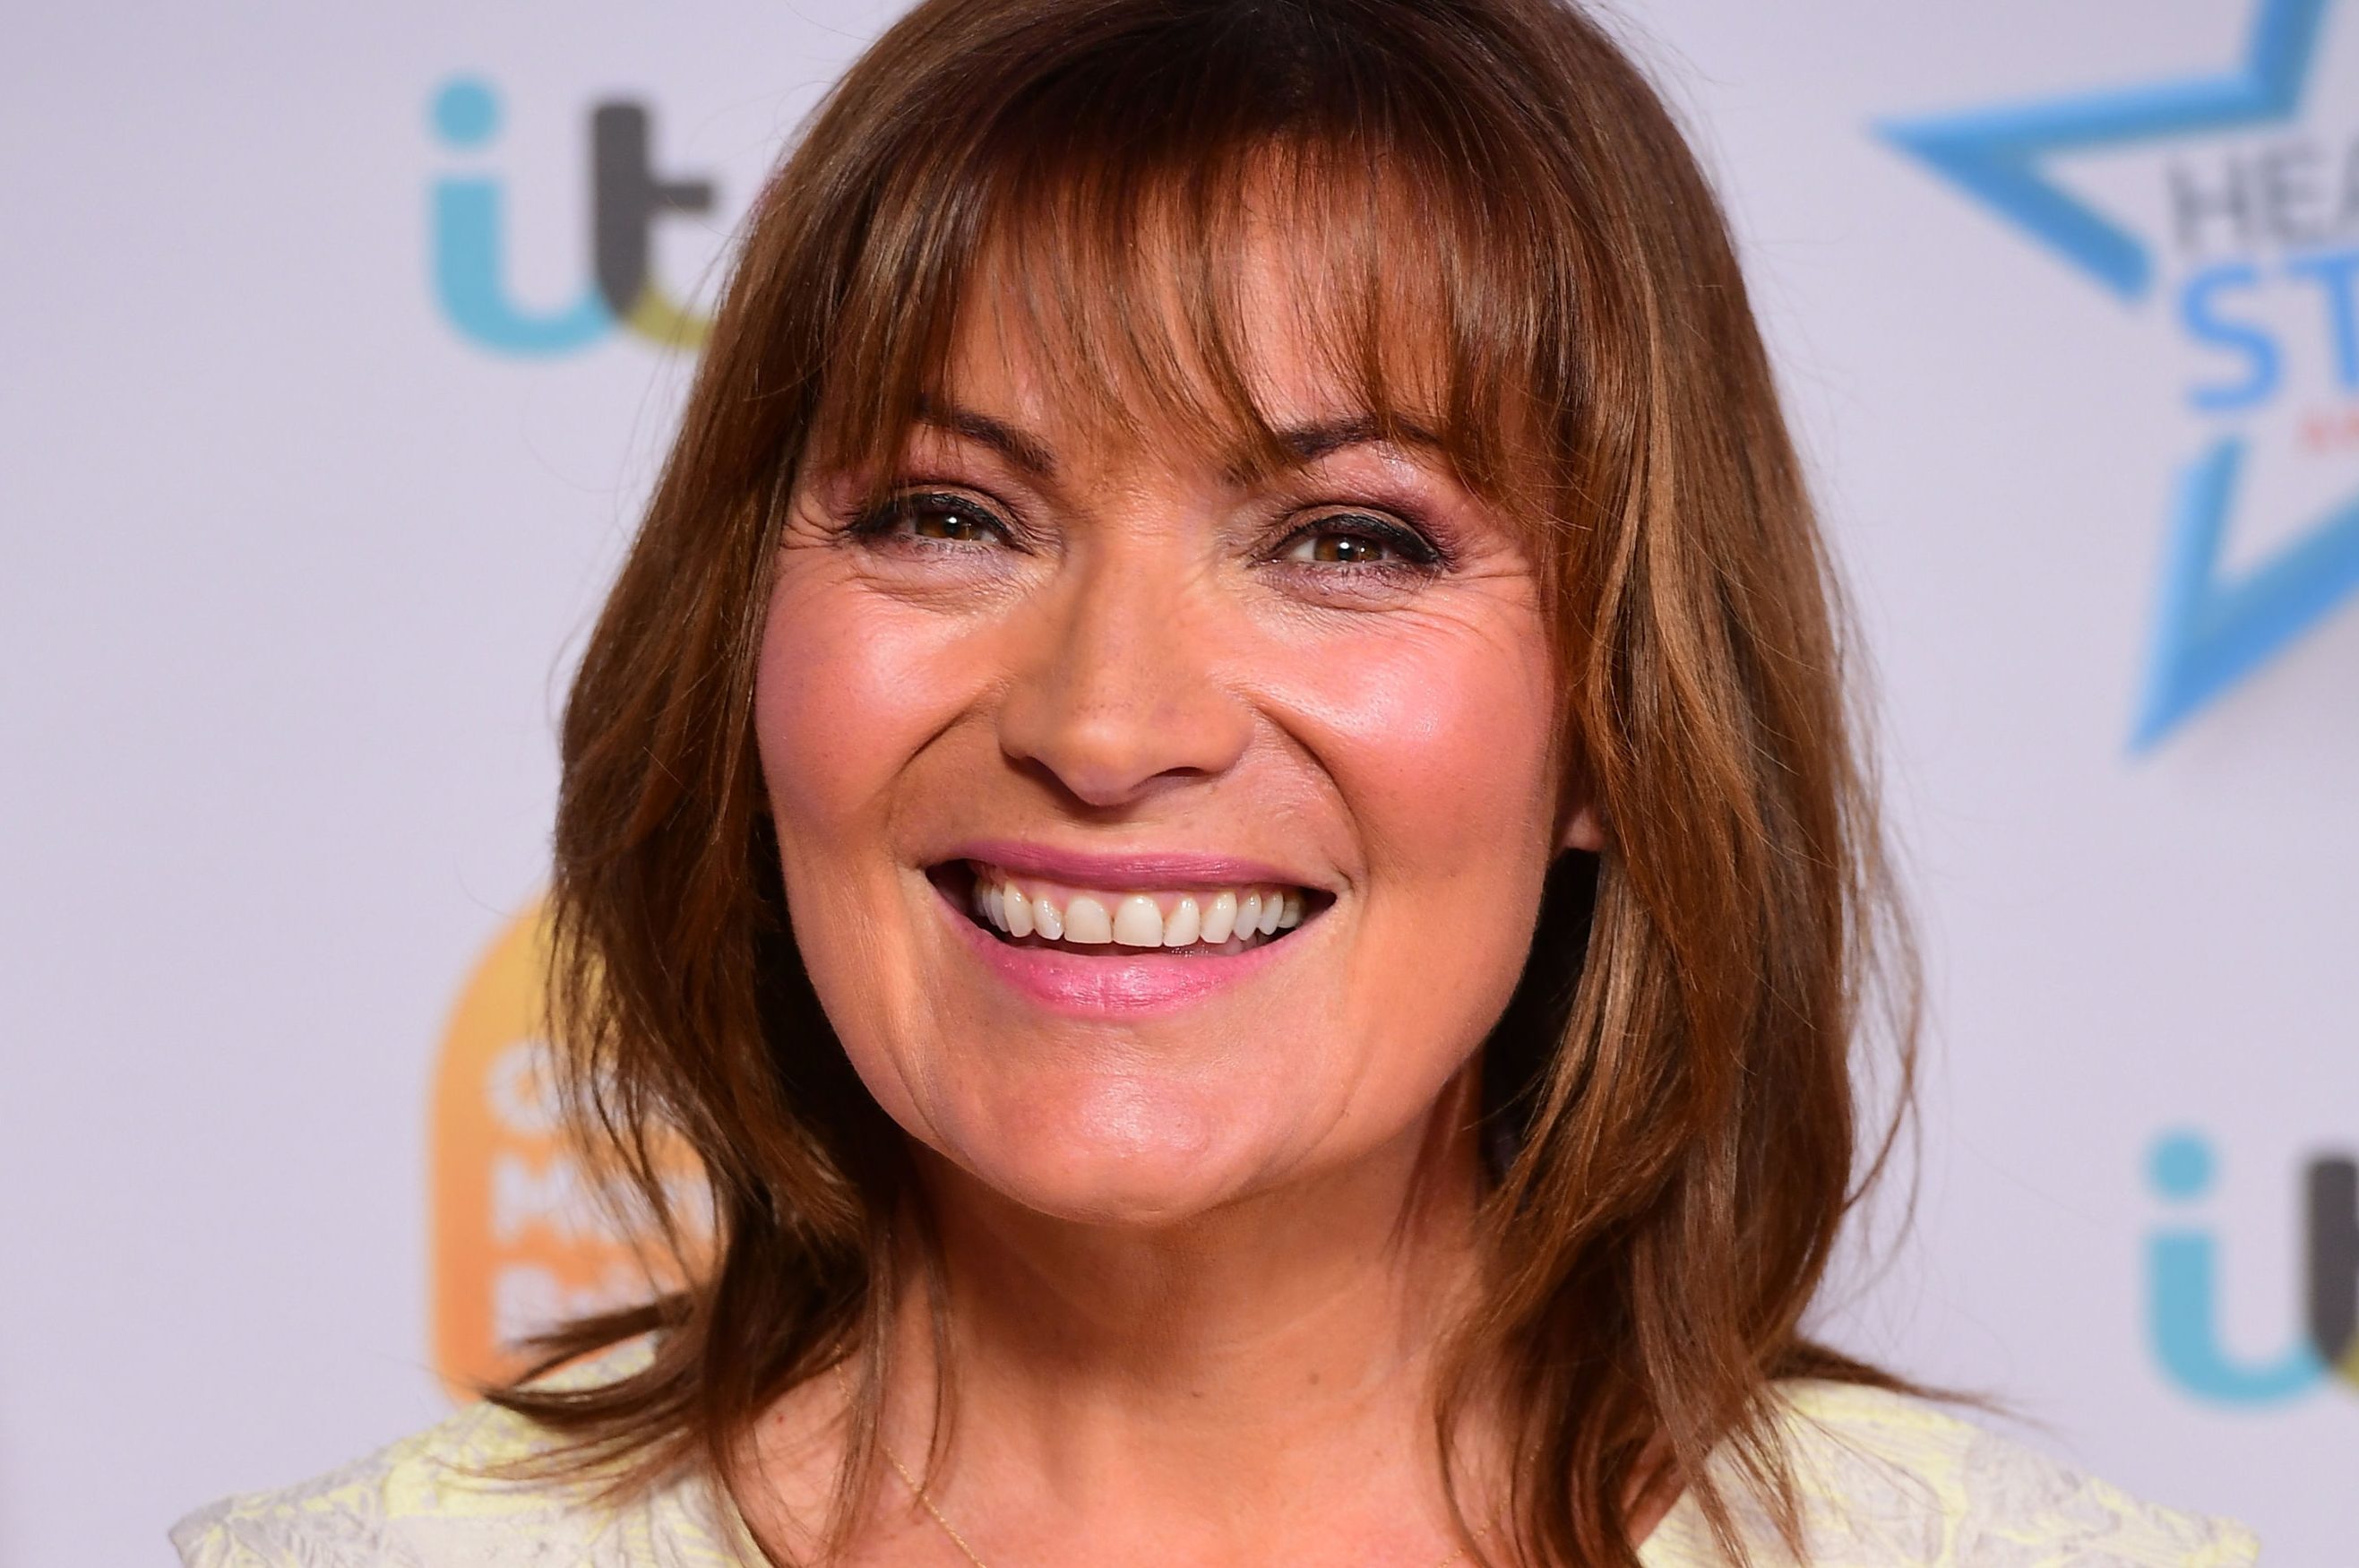 Scots TV presenter Lorraine Kelly reveals her thoughts on